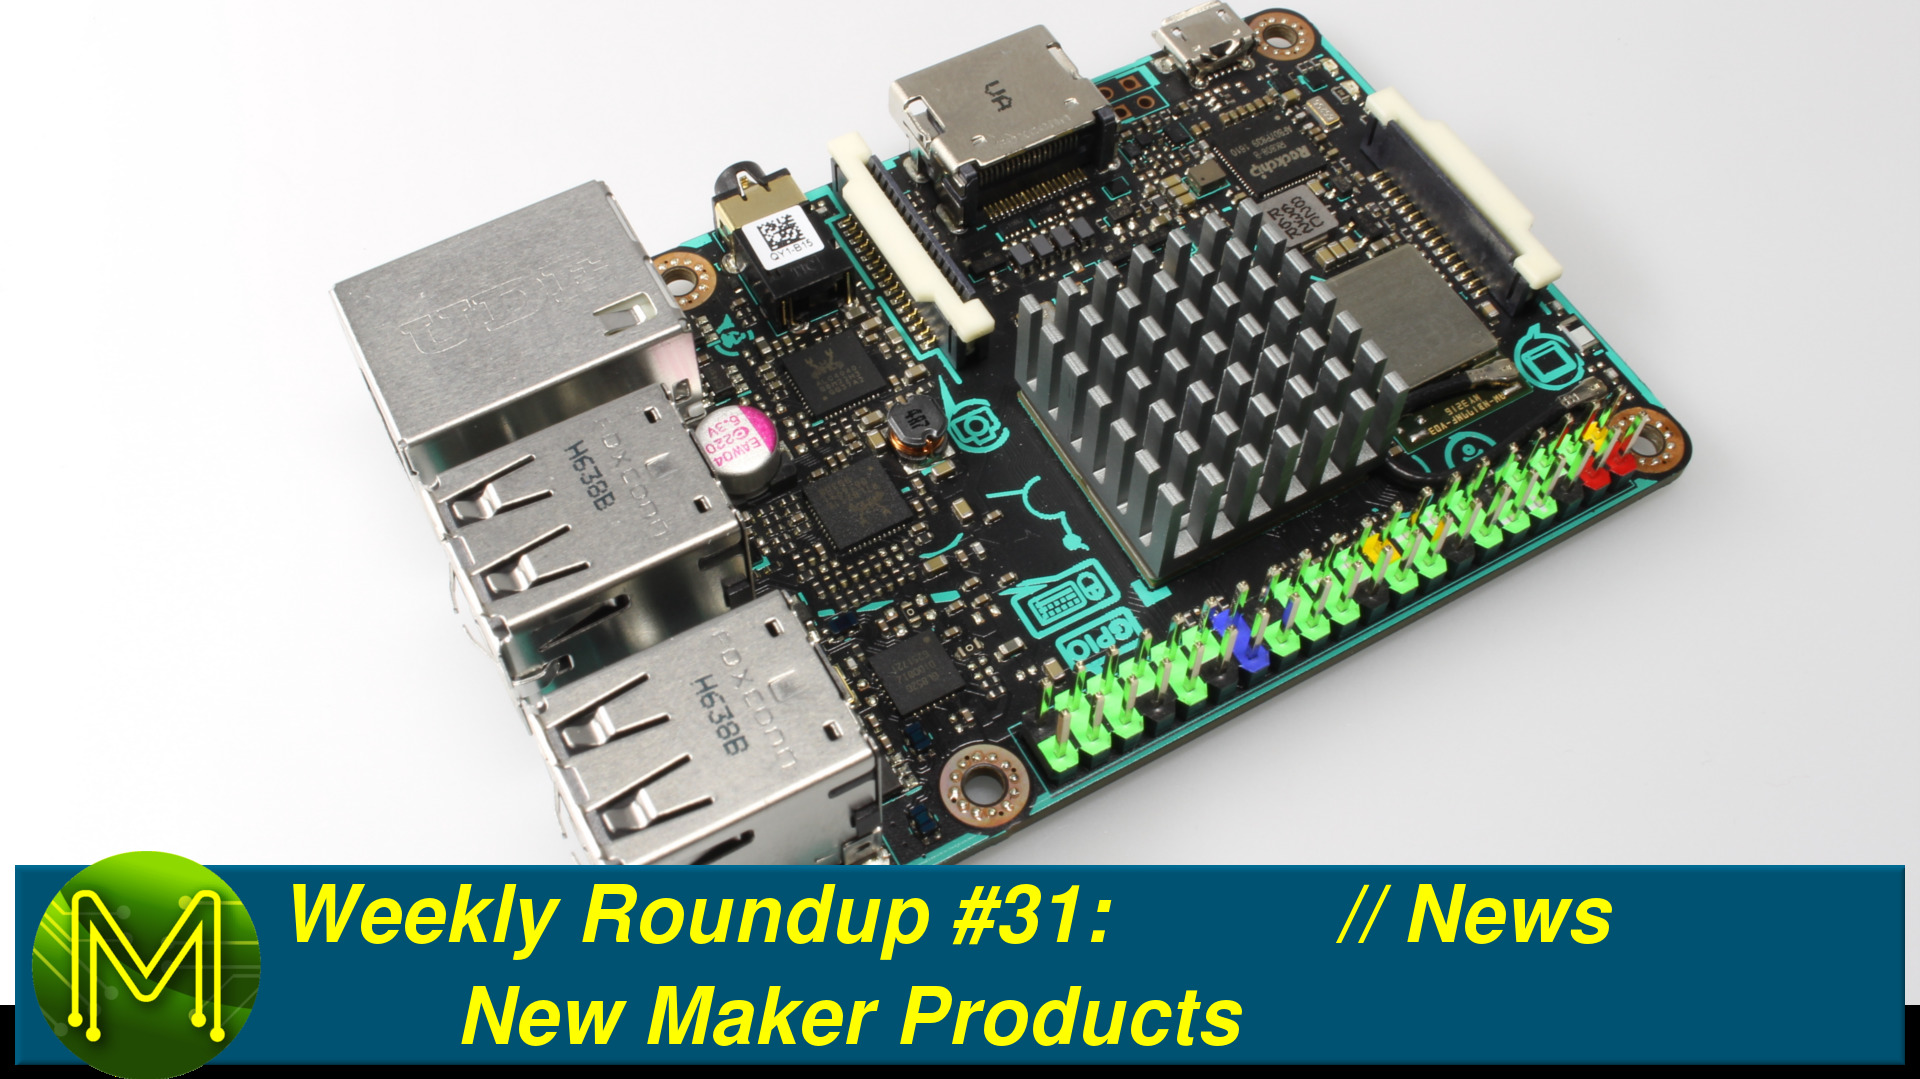 Weekly Roundup #31 - New Maker Products // News